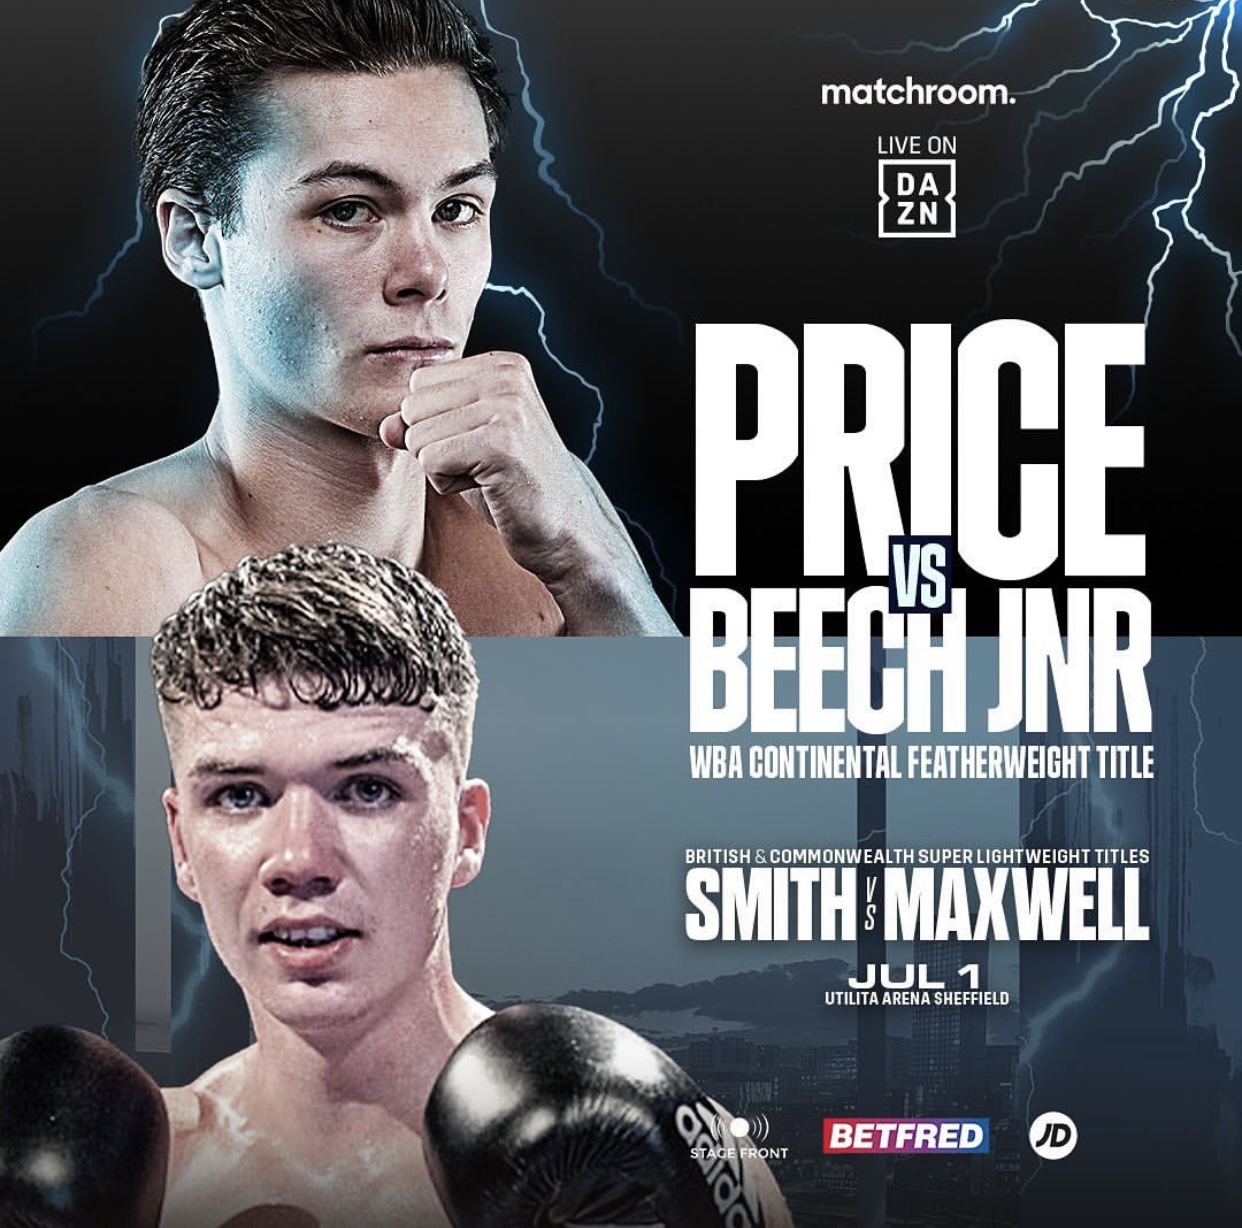 Price defends his WBA Continental belt against Beech this Saturday